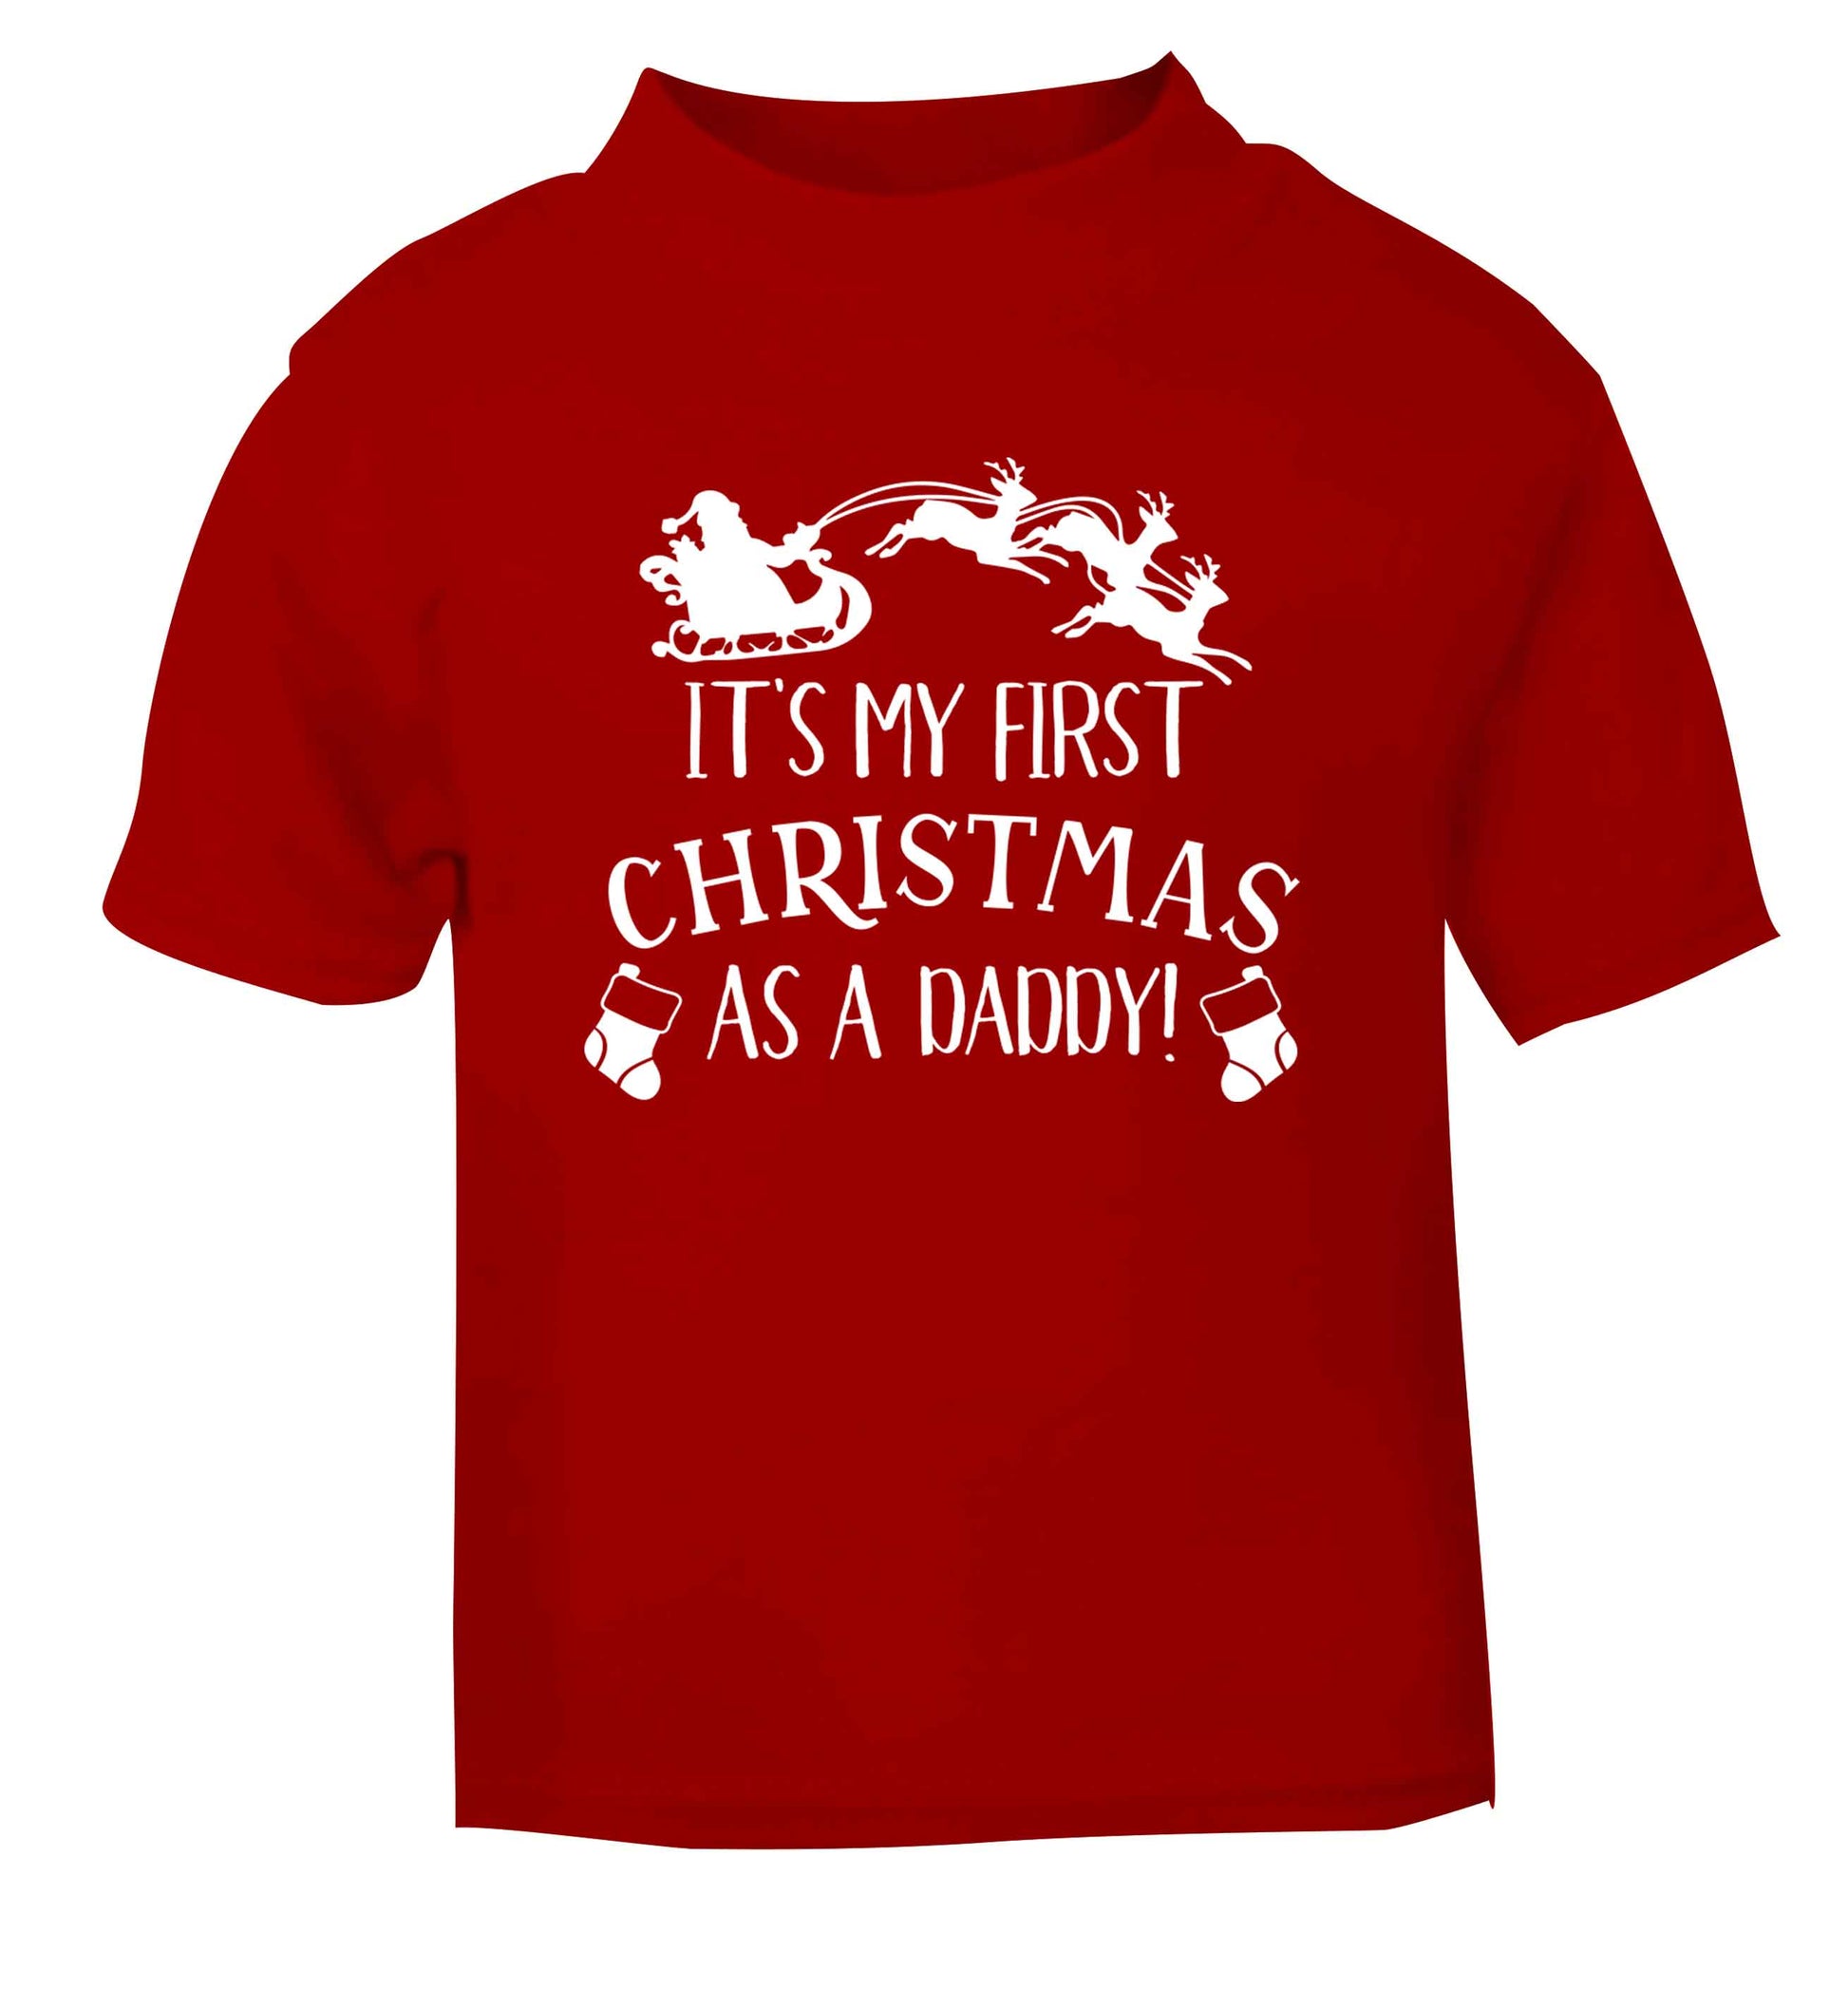 It's my first Christmas as a daddy red Baby Toddler Tshirt 2 Years